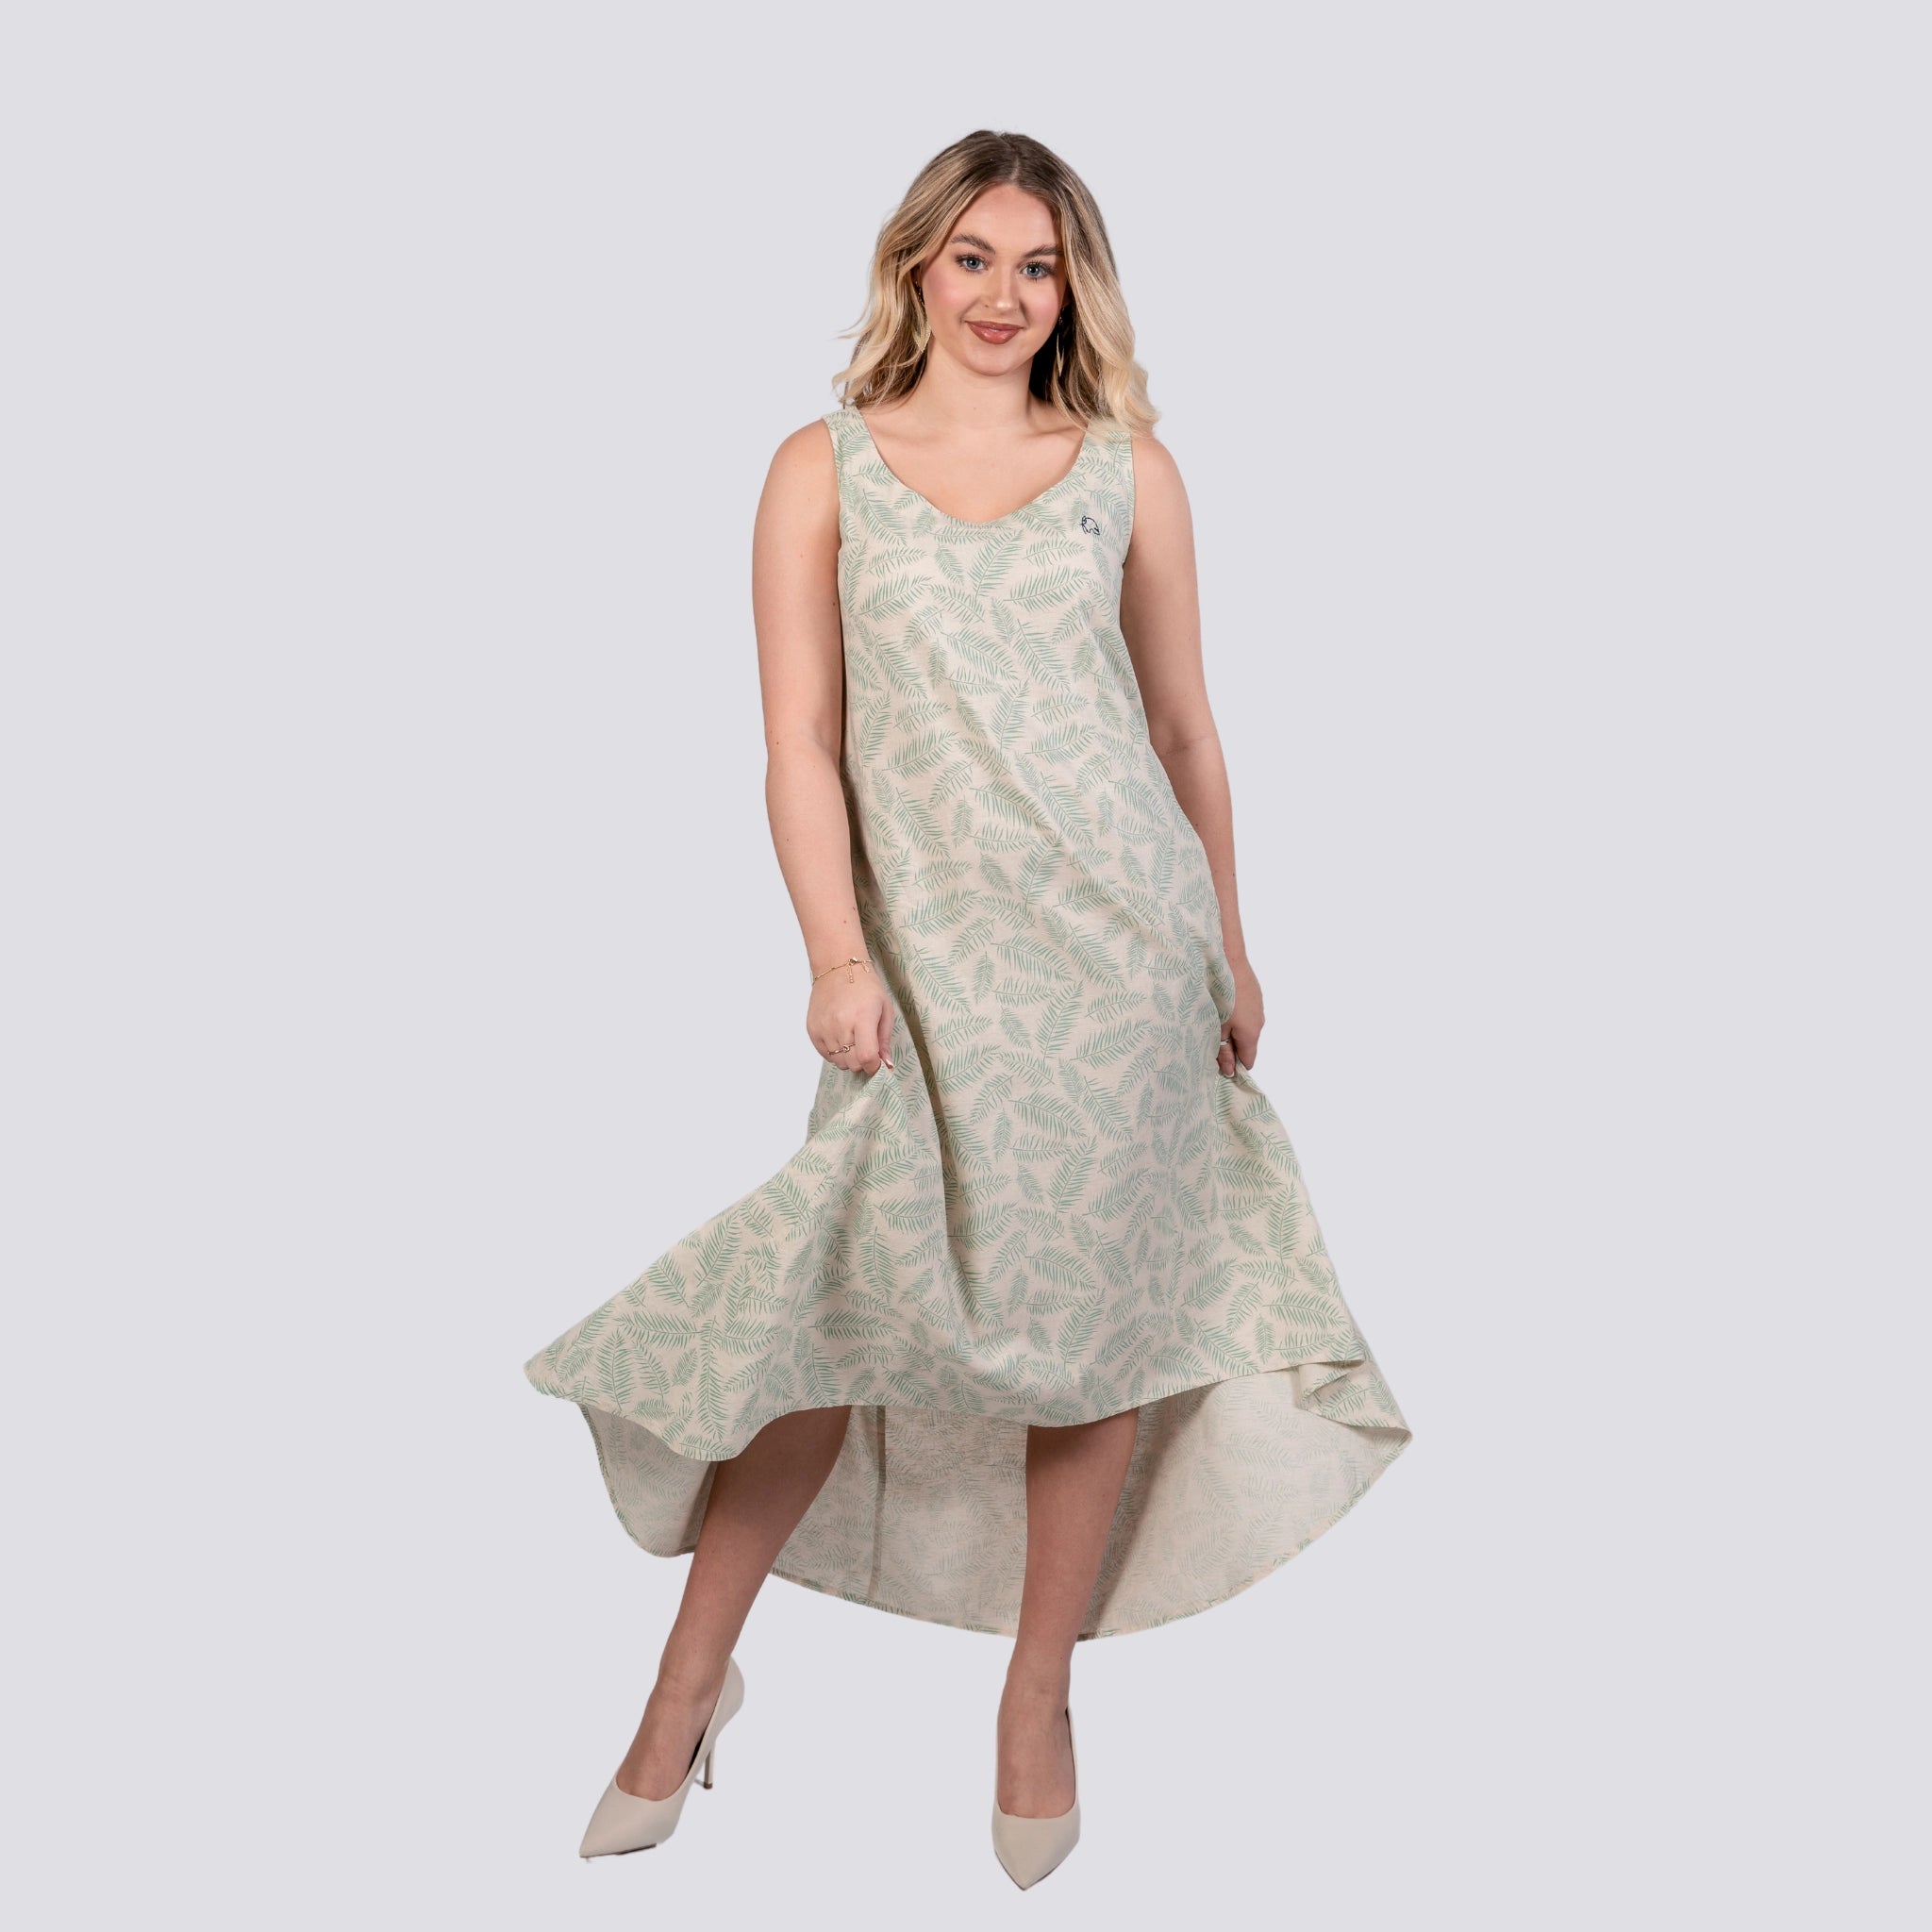 A woman in a flowing Karee Mystic Breeze High Low Linen Cotton Midi Dress, standing against a plain background, smiling and slightly lifting her dress.